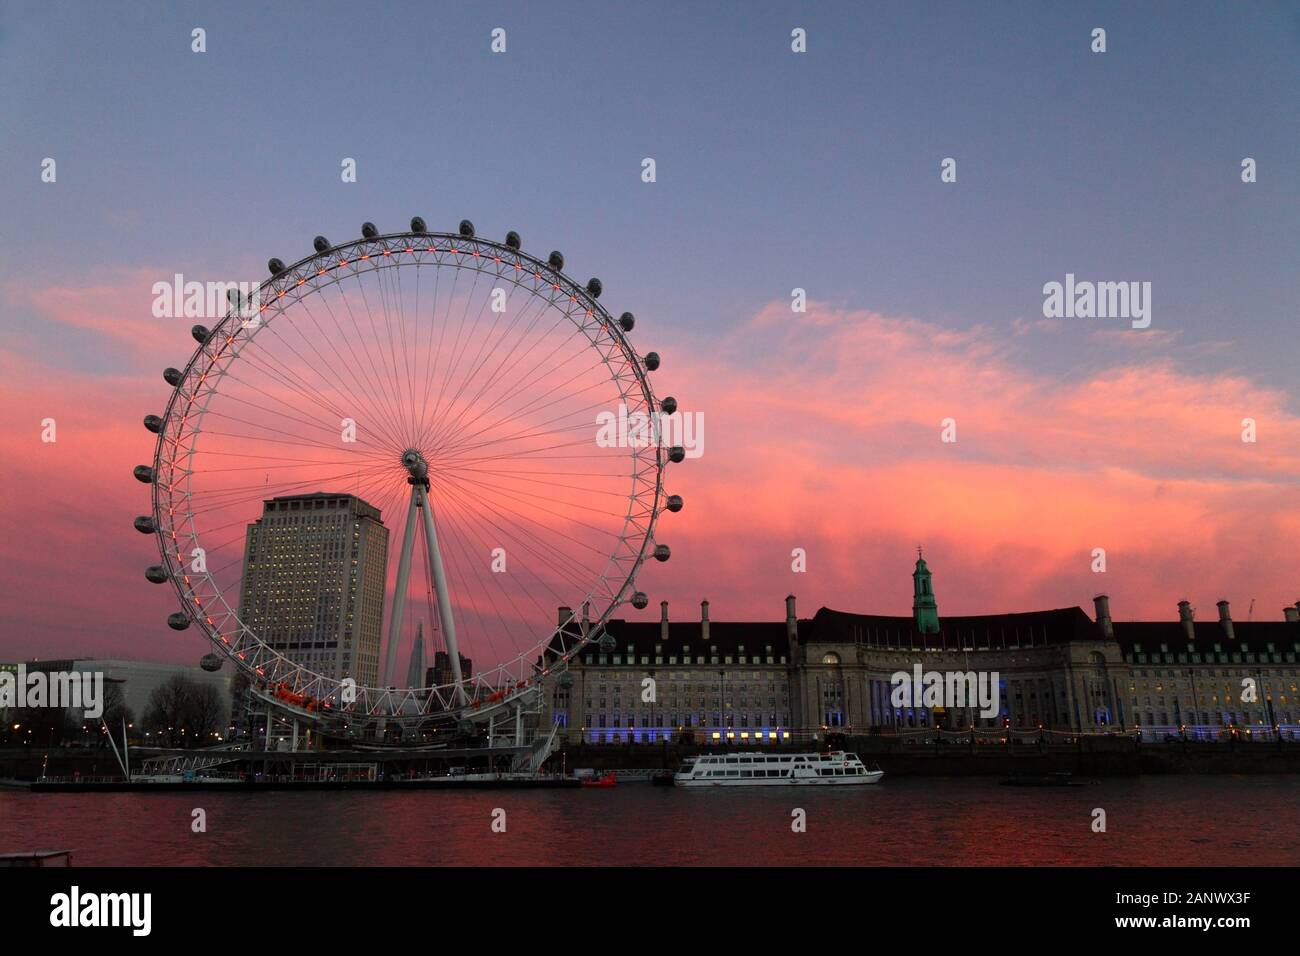 London Eye, Shell Centre building and County Hall at sunset, London, England Stock Photo